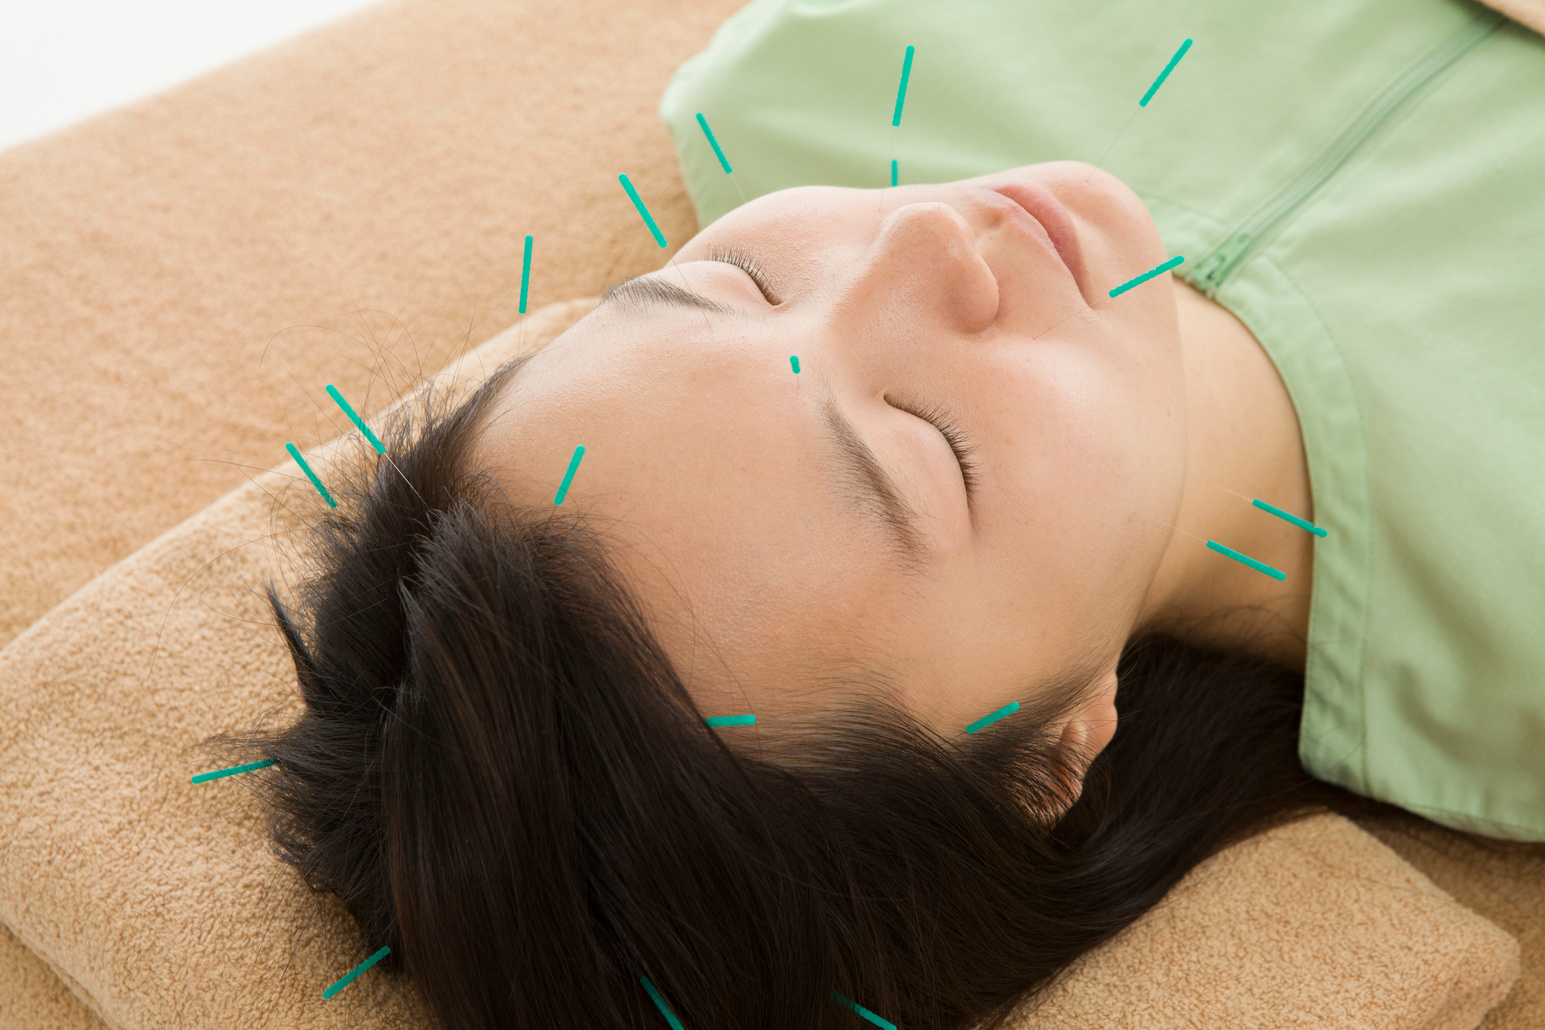 Beauty acupuncture